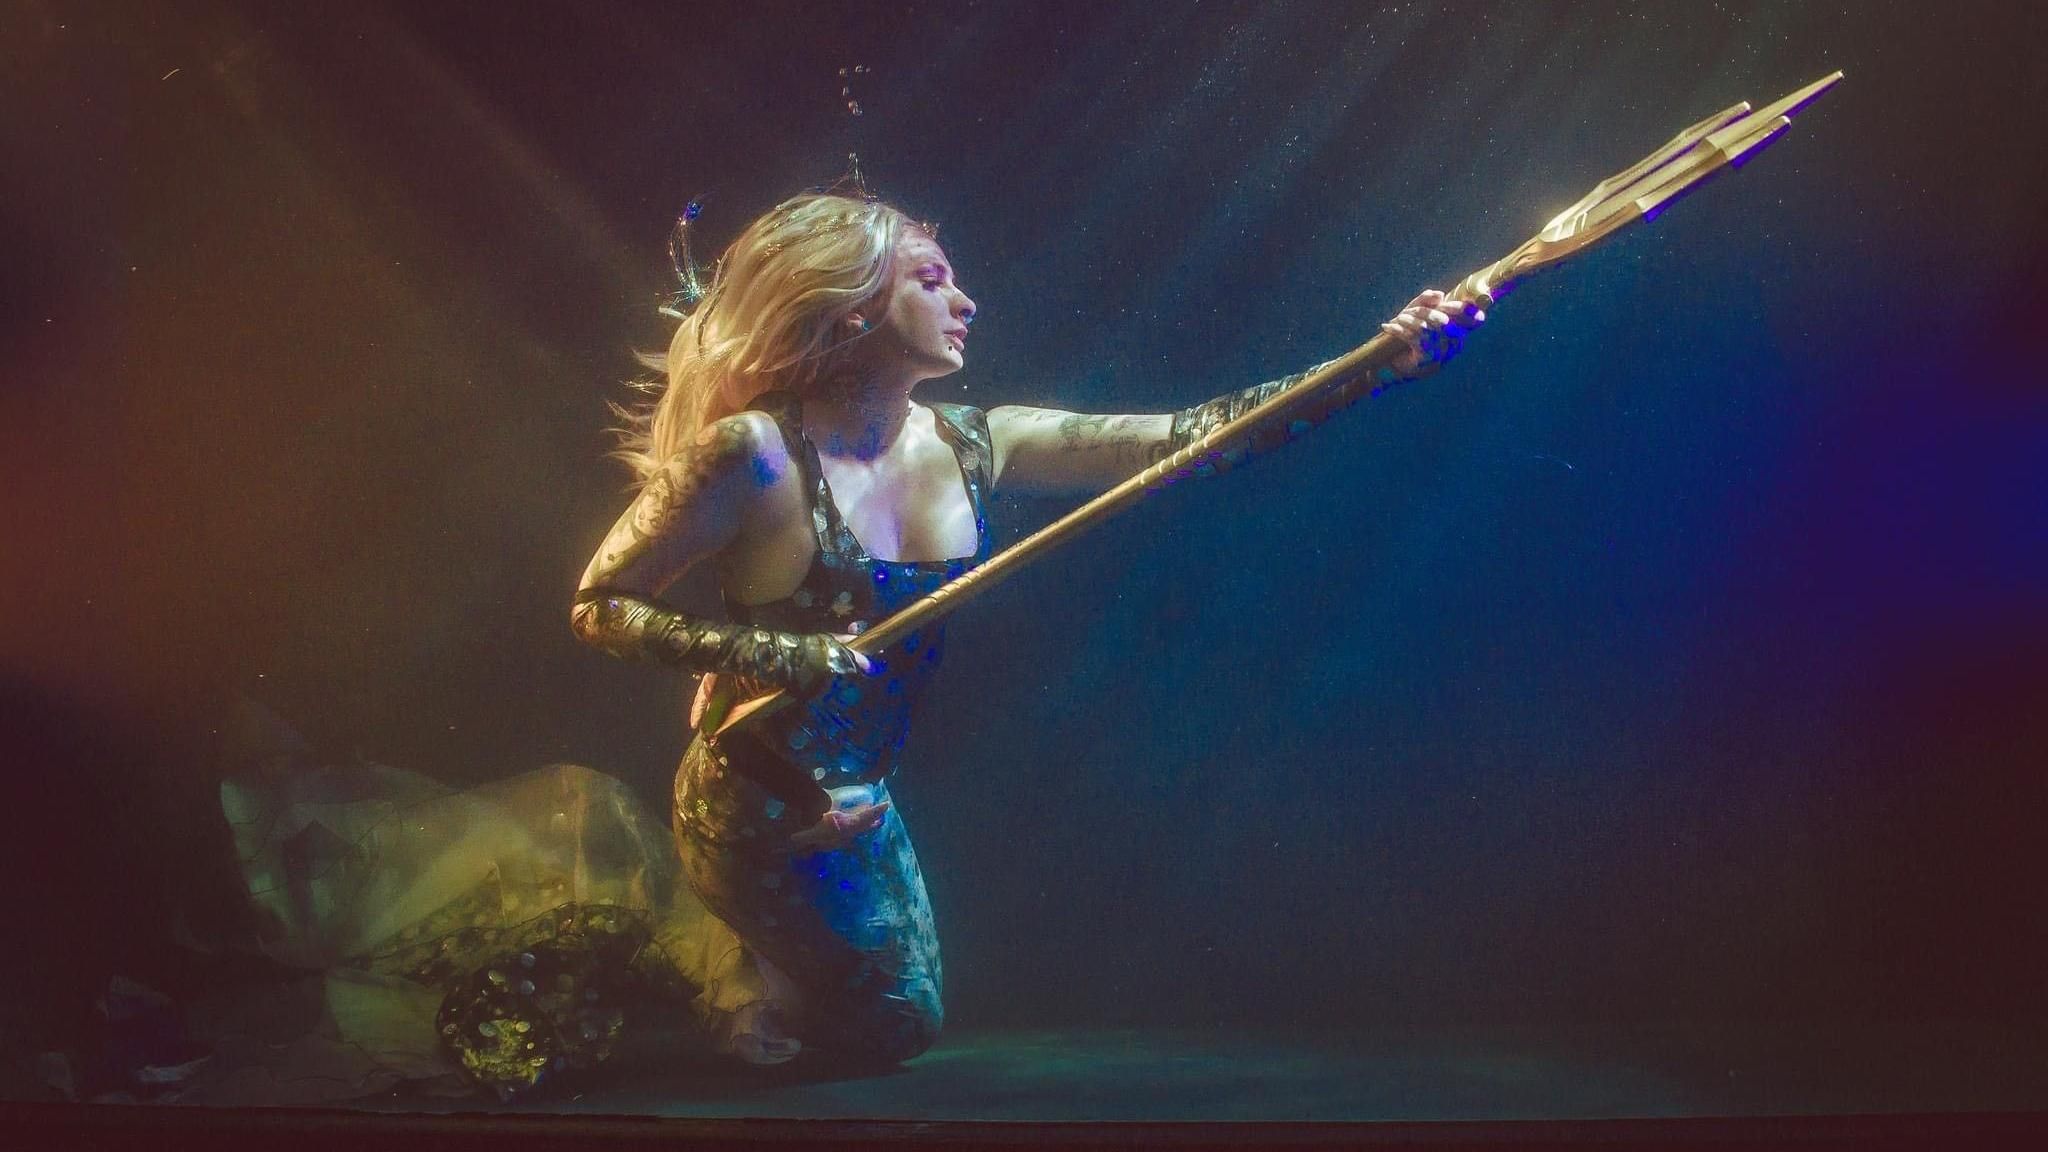 Tyler Turner holding a trident and wearing a mermaid tail and top, and a blonde wig.